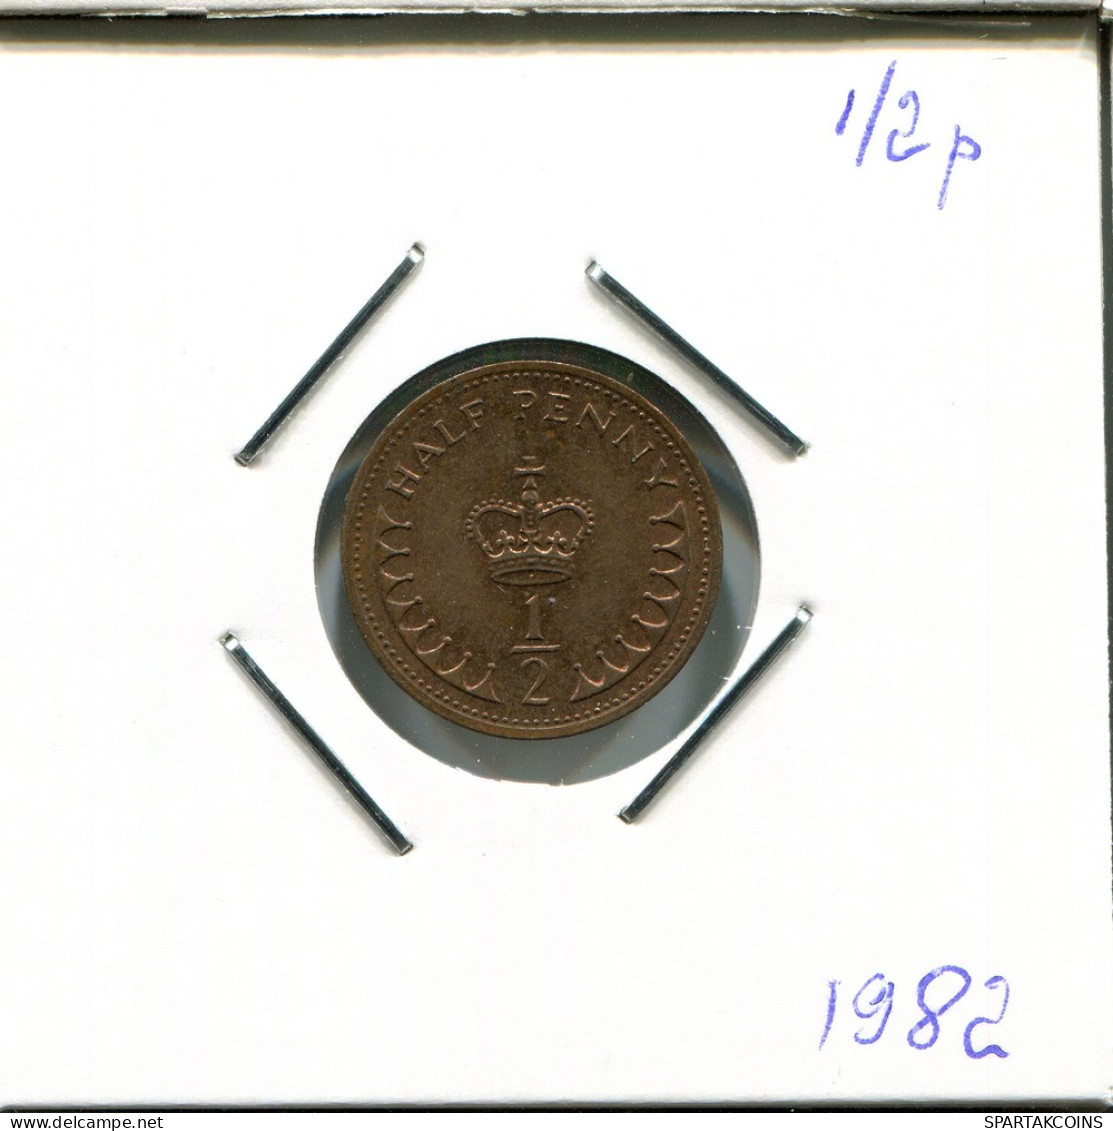 PENNY 1982 UK GREAT BRITAIN Coin #AR363.U - 1 Penny & 1 New Penny